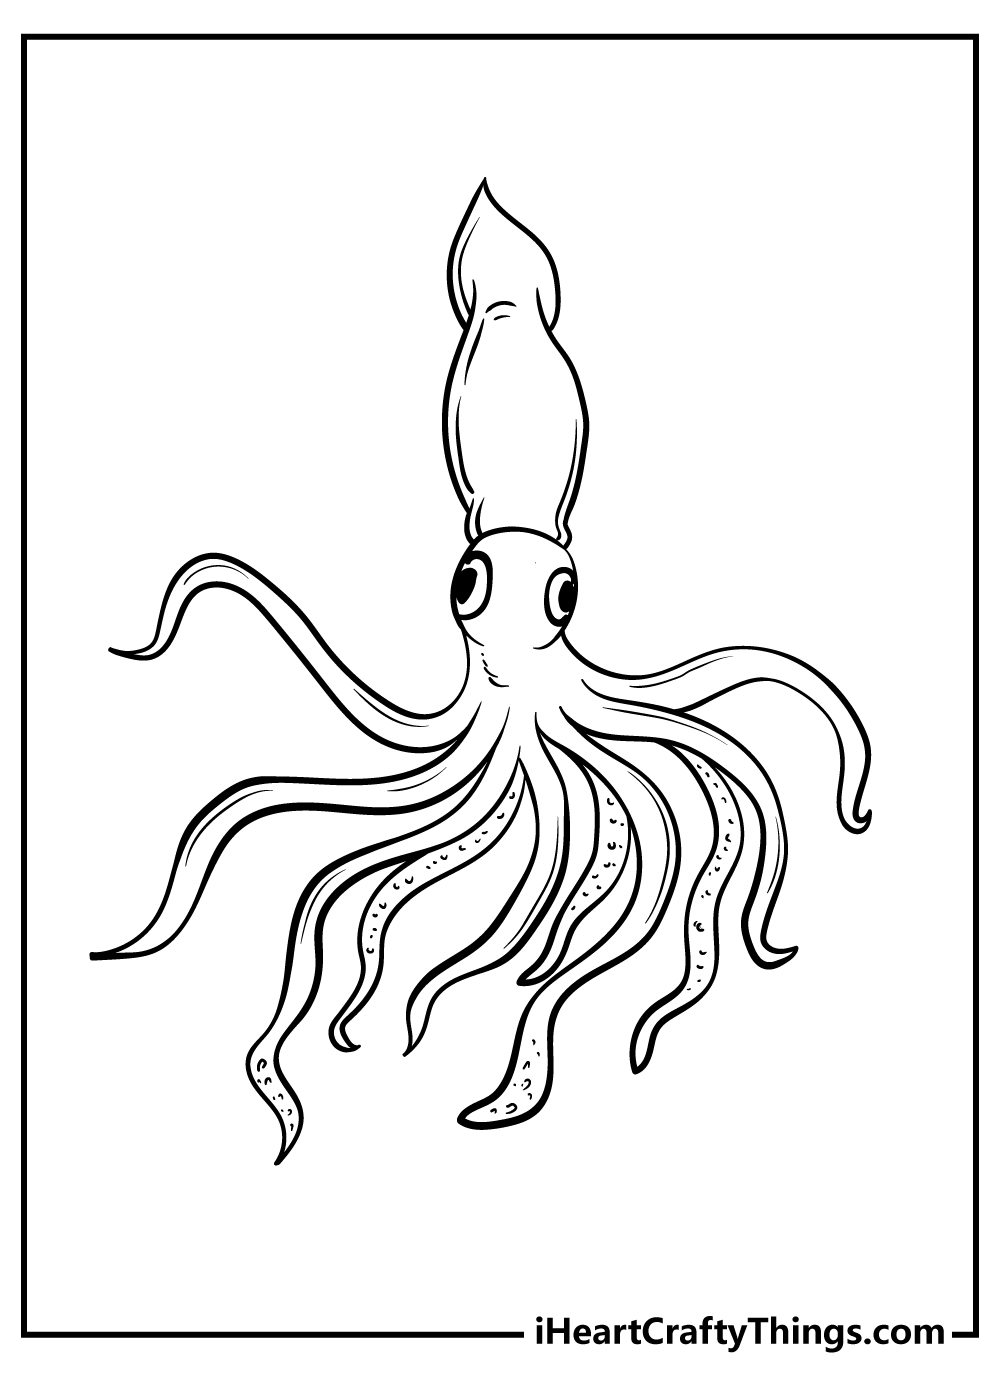 mythical sea creatures Coloring Pages free printable